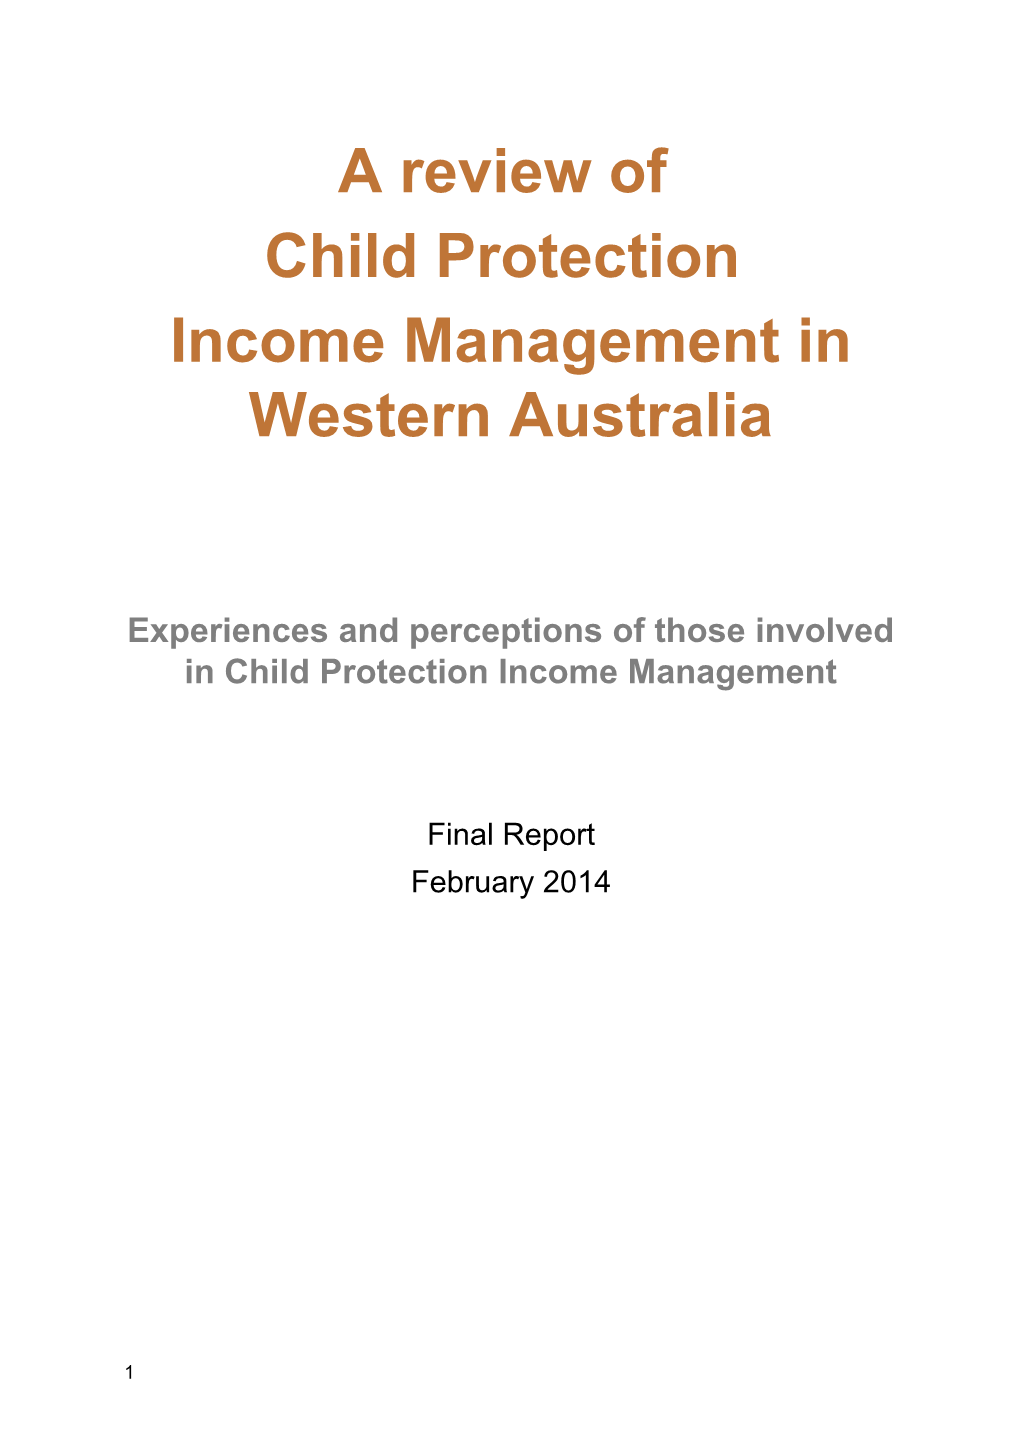 Income Management in Western Australia